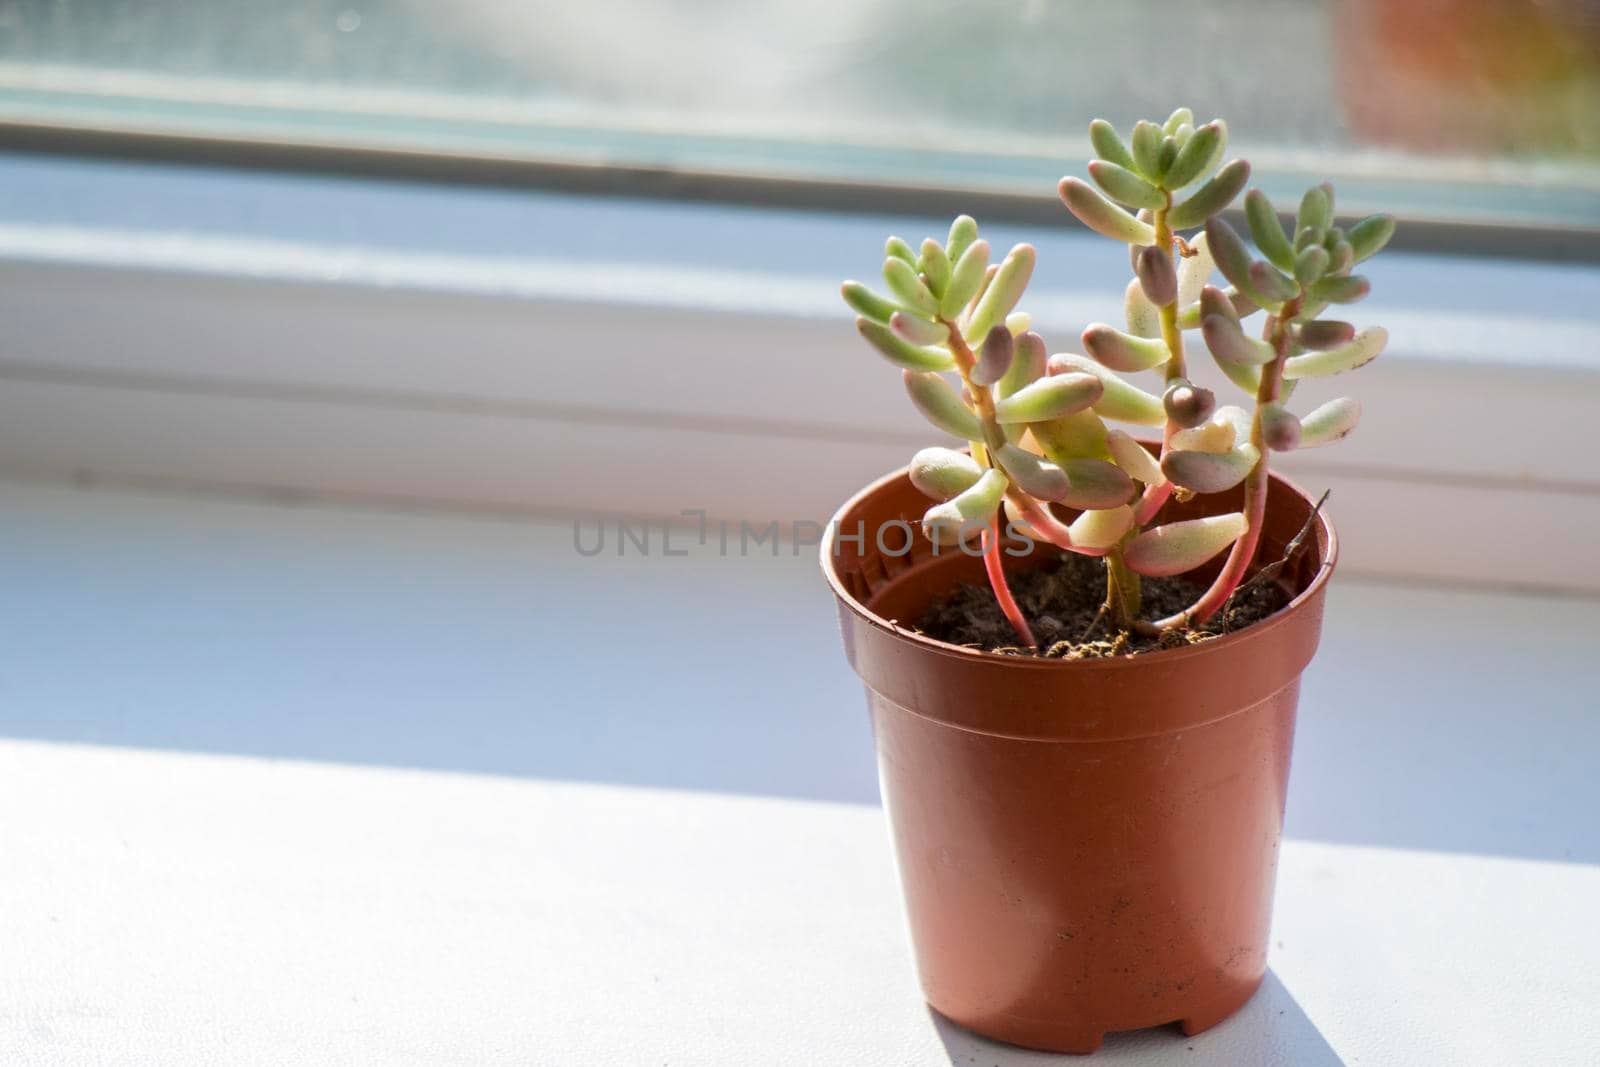 Succulent on the window, sunlight and close-up by Taidundua